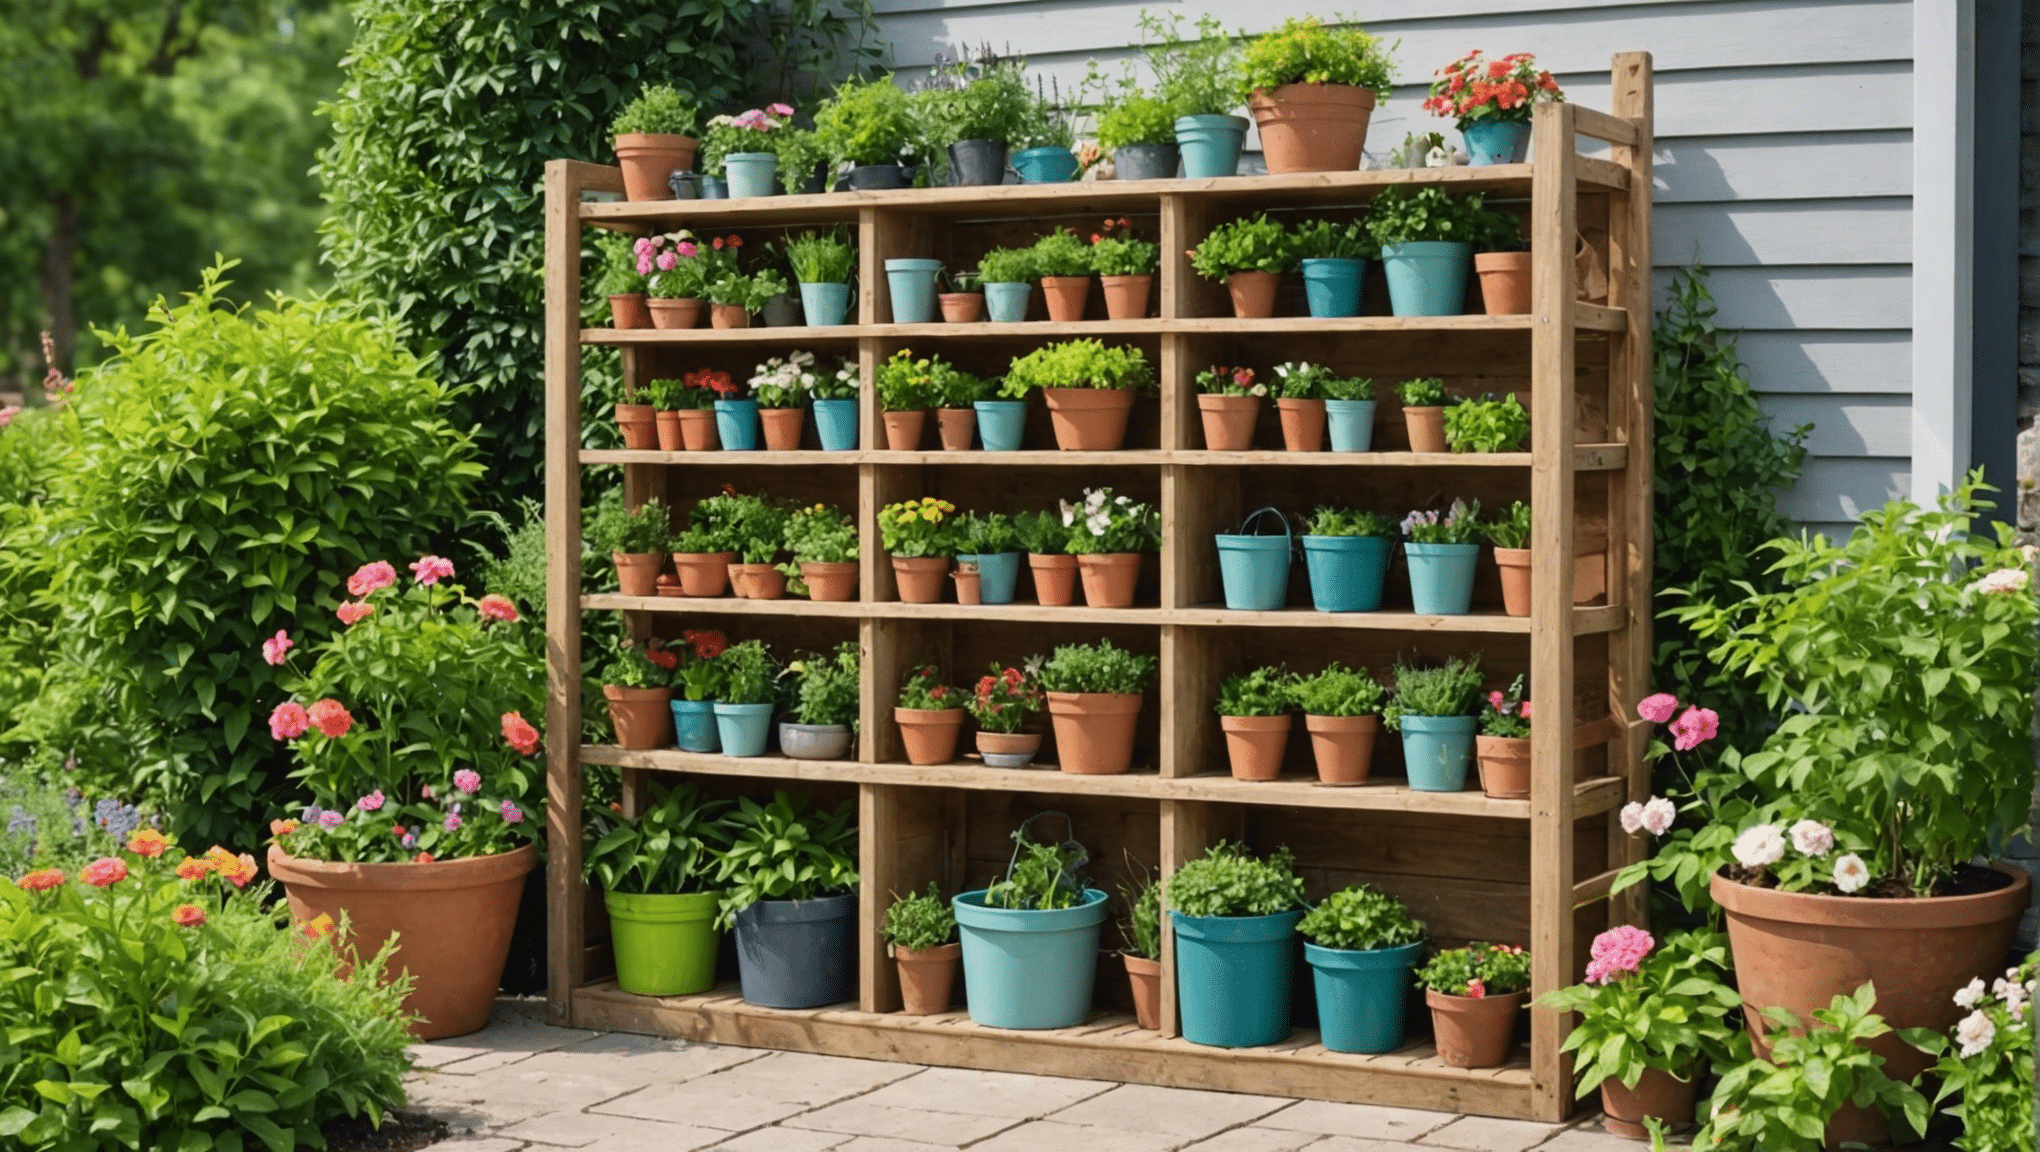 discover innovative gardening tool storage ideas to keep your tools organized and your garden looking its best.